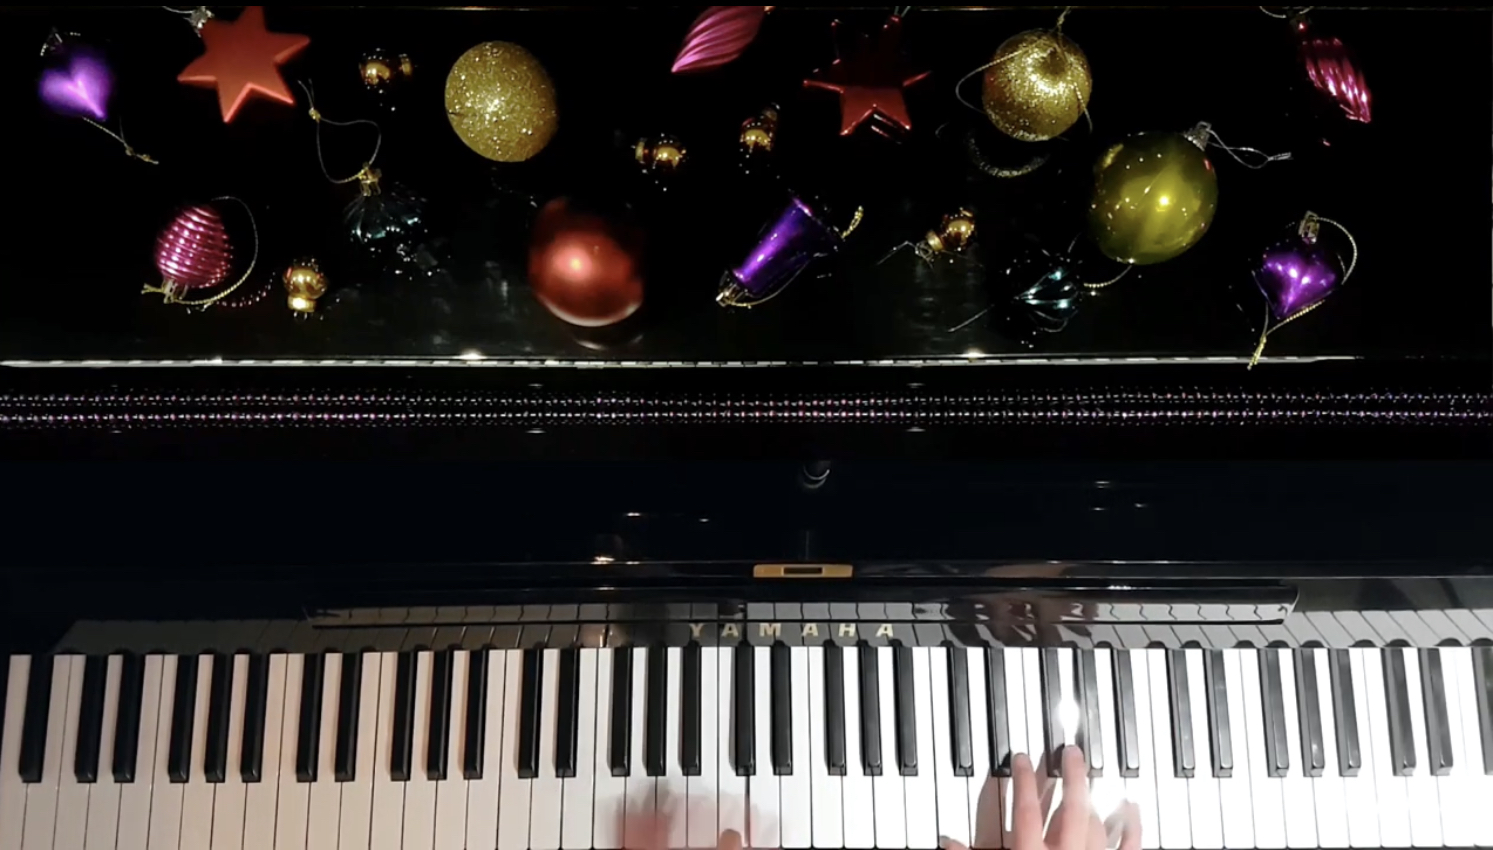 Lindsey Stirling's "Carol of the Bells" on Piano